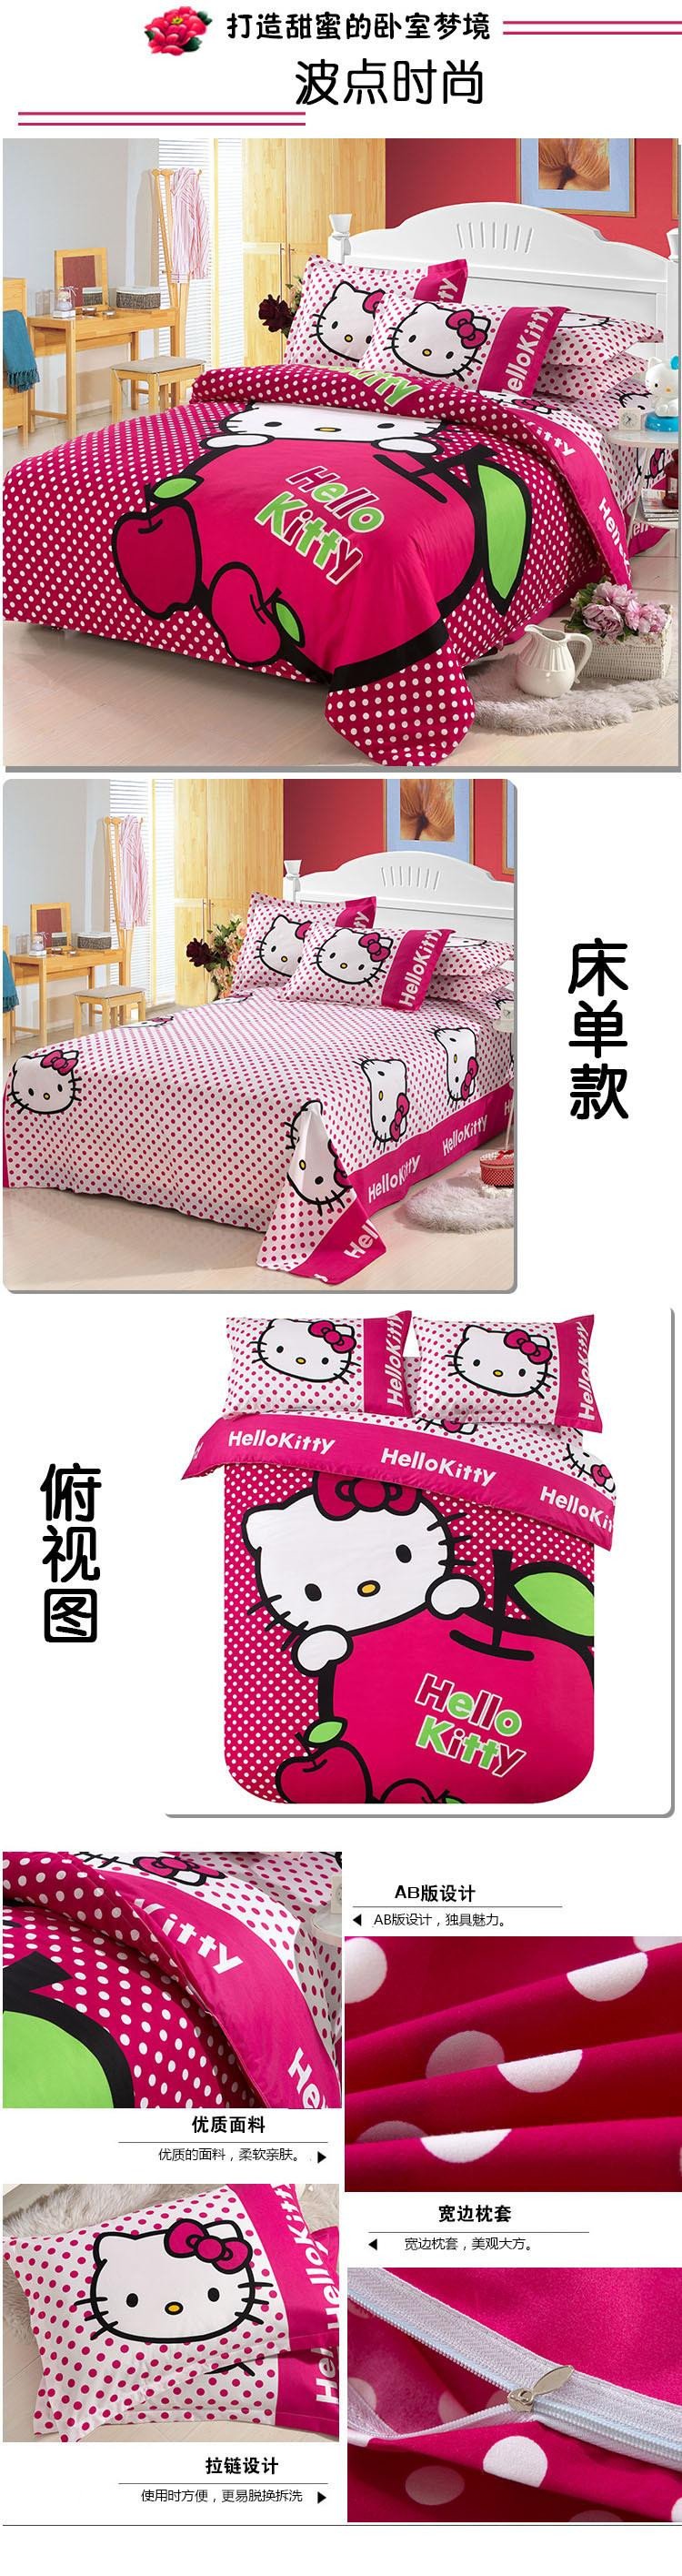 Hello Kitty Bedroom Set Unique Cotton Hello Kitty Home Textile Reactive Print Bedding Sets Cartoon Bed Sheet Duvet Cover Set Bedding Set Pink Duvet forters and Bedding From